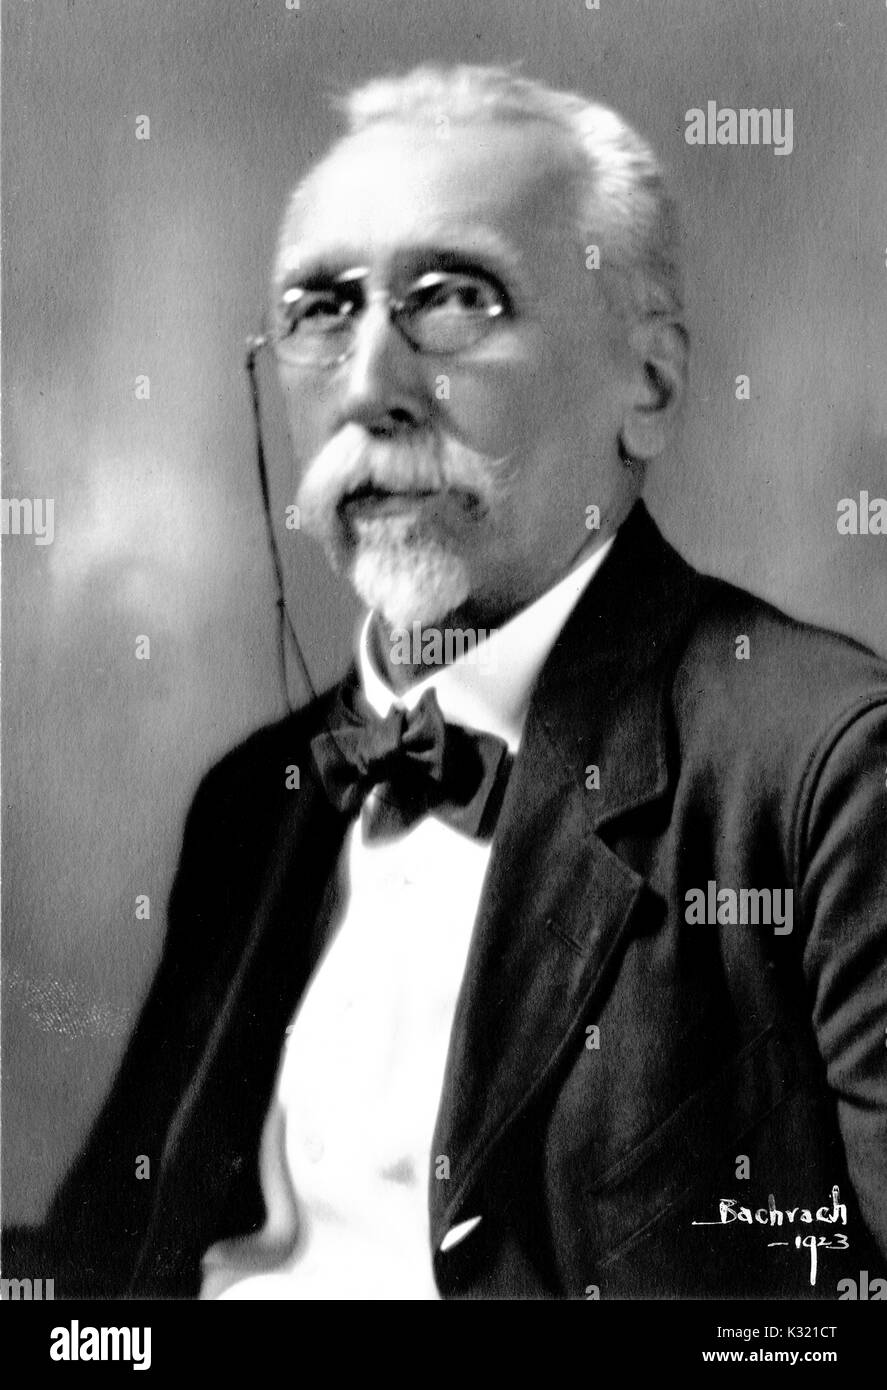 Portrait photograph of German linguist Hermann Collitz, during his time as a Germanic studies chair at Johns Hopkins University in Baltimore, Maryland, 1923. Stock Photo